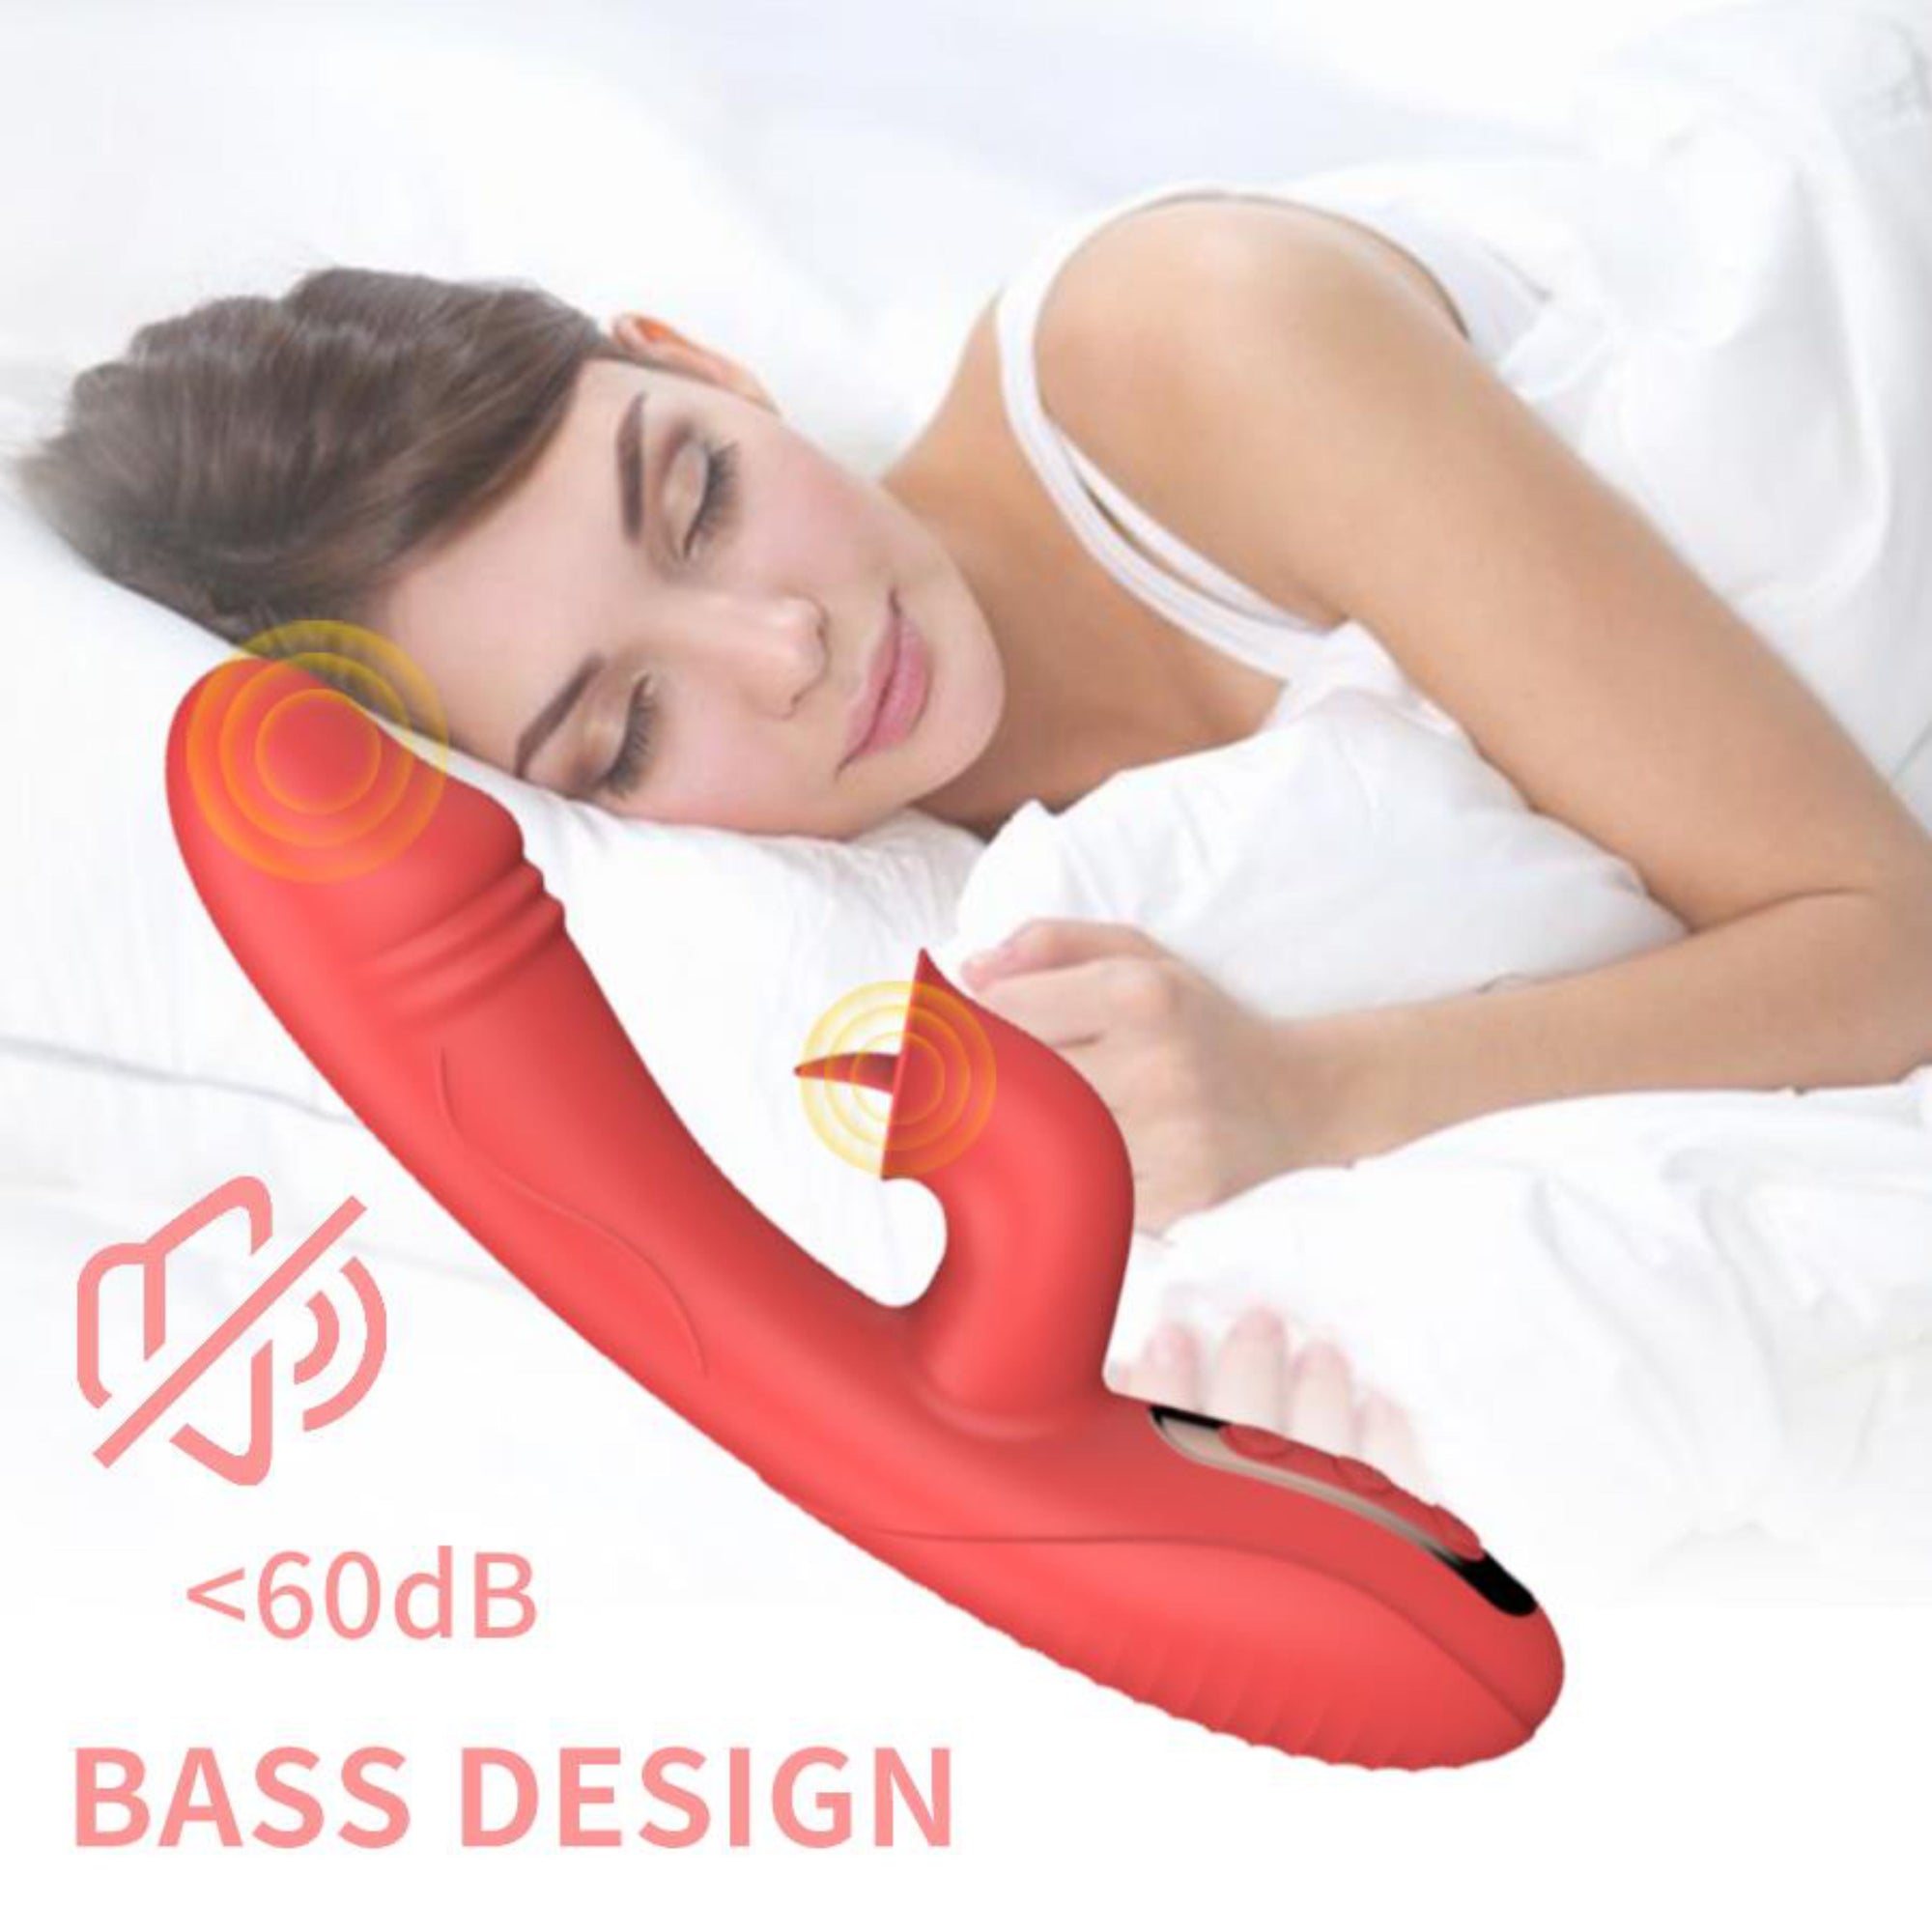 VIBRATOR WITH CLIT LICKING TONGUE